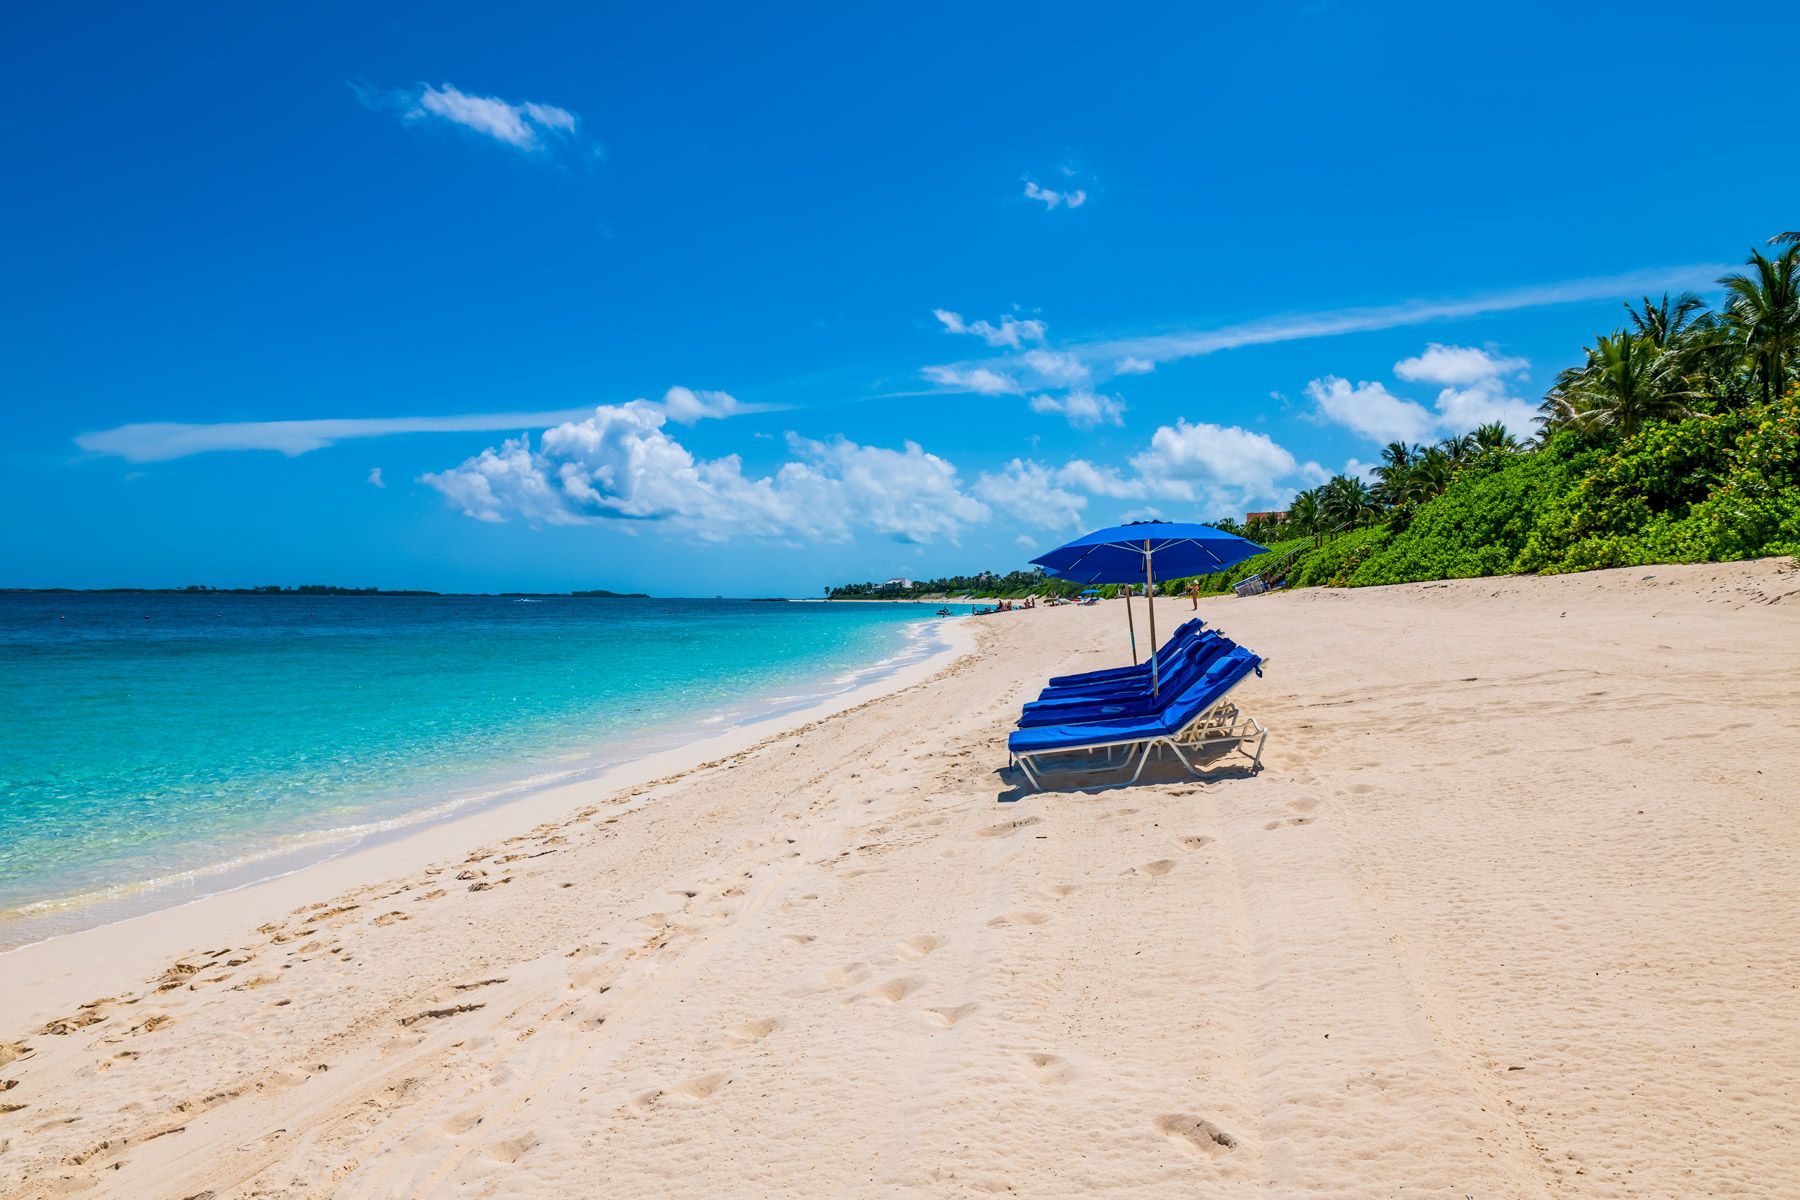 The 12 Best Beaches In Nassau The Bahamas Incl Photos Sandals